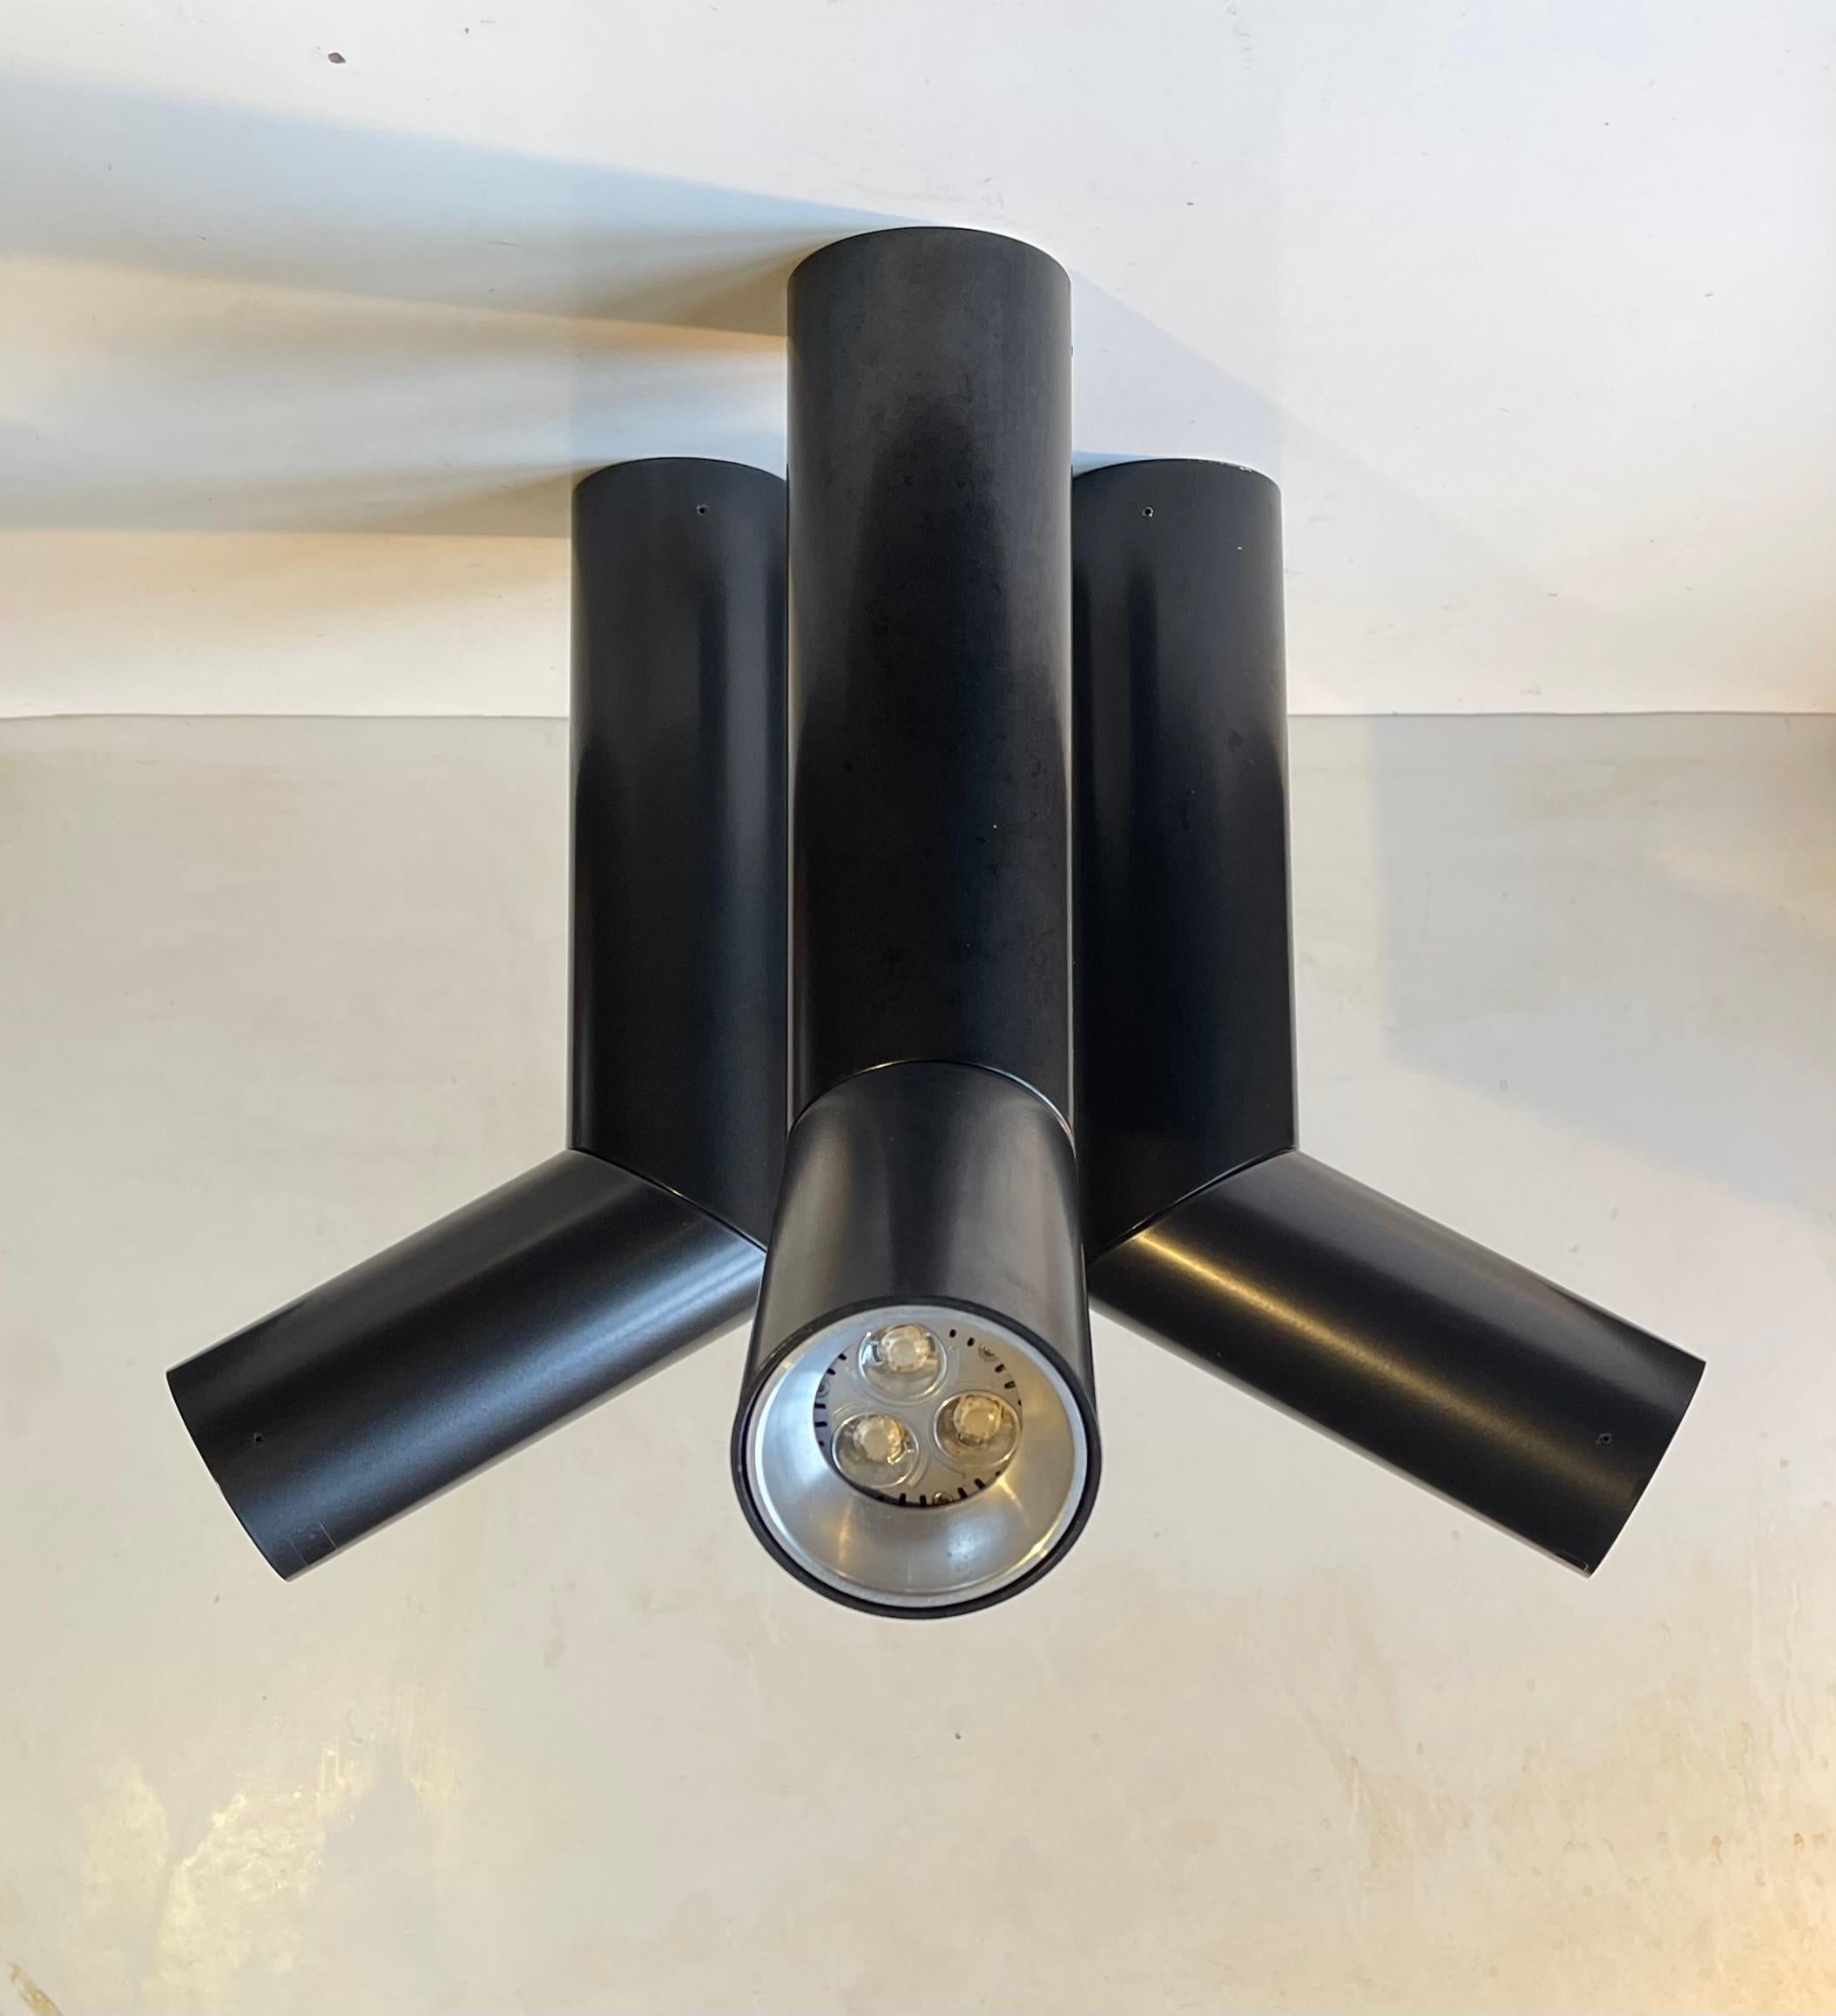 E06 is a family of adjustable luminaires with a cylindrical/tubular lamp body. Here a set of 3 in satin black. Designed by Habits Studio in 2008 and produced by the famous Luceplan brand. They feature a cylindrical body in extruded aluminum. It has